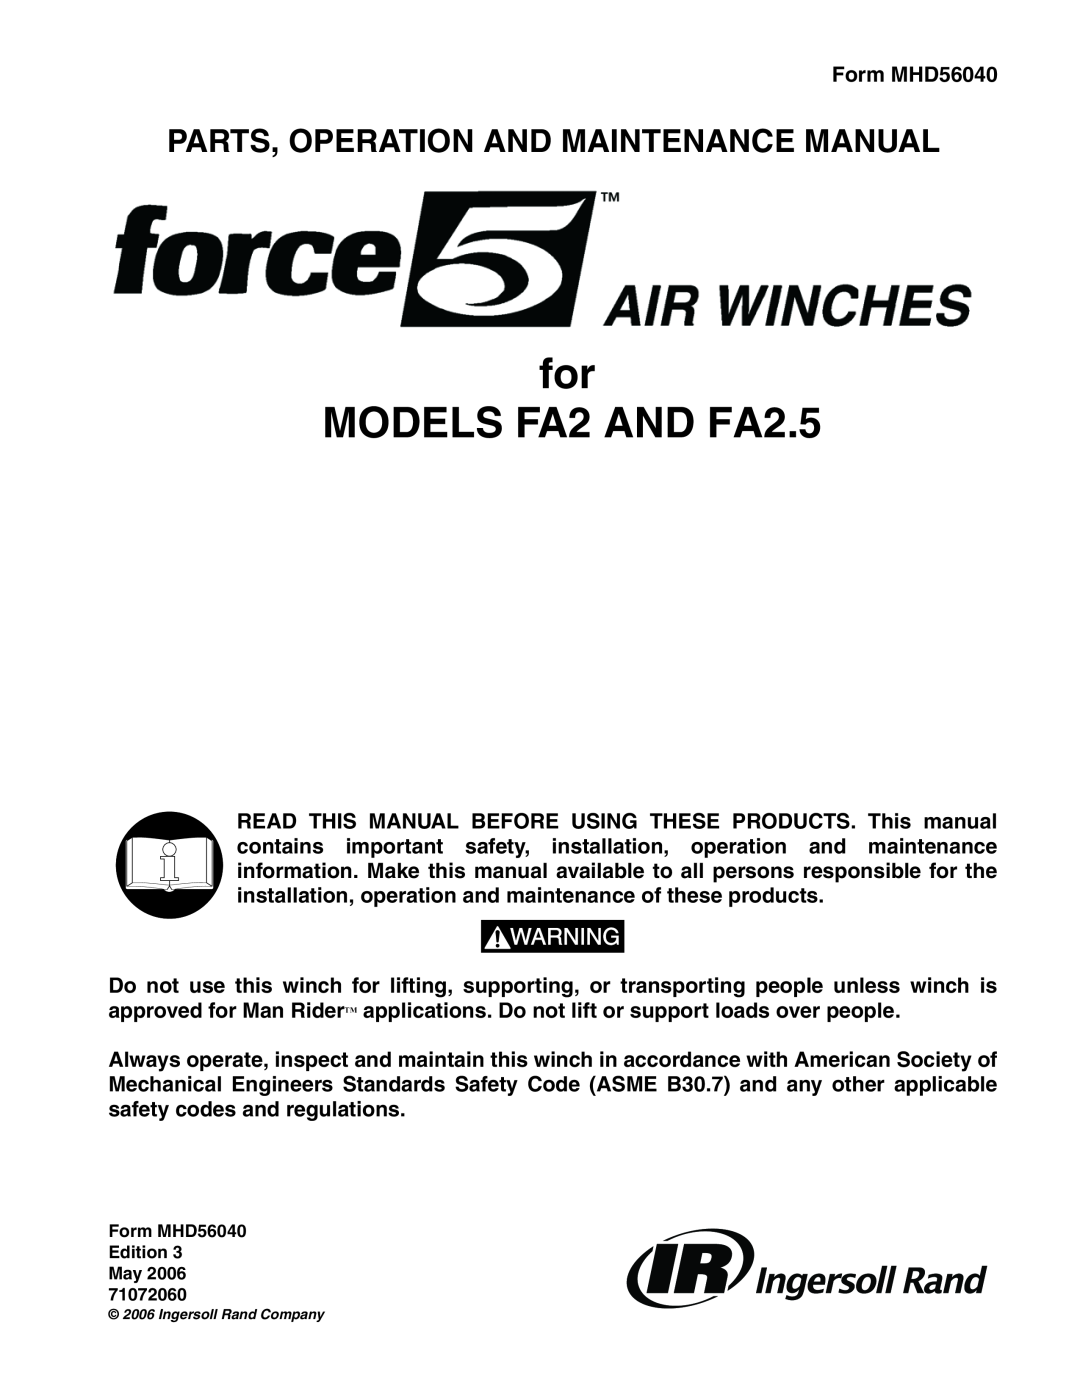 Ingersoll-Rand Fulcrum Electric, HU40A, LS500RLP-E, FH2 for MODELS FA2 AND FA2.5, Parts, Operation And Maintenance Manual 